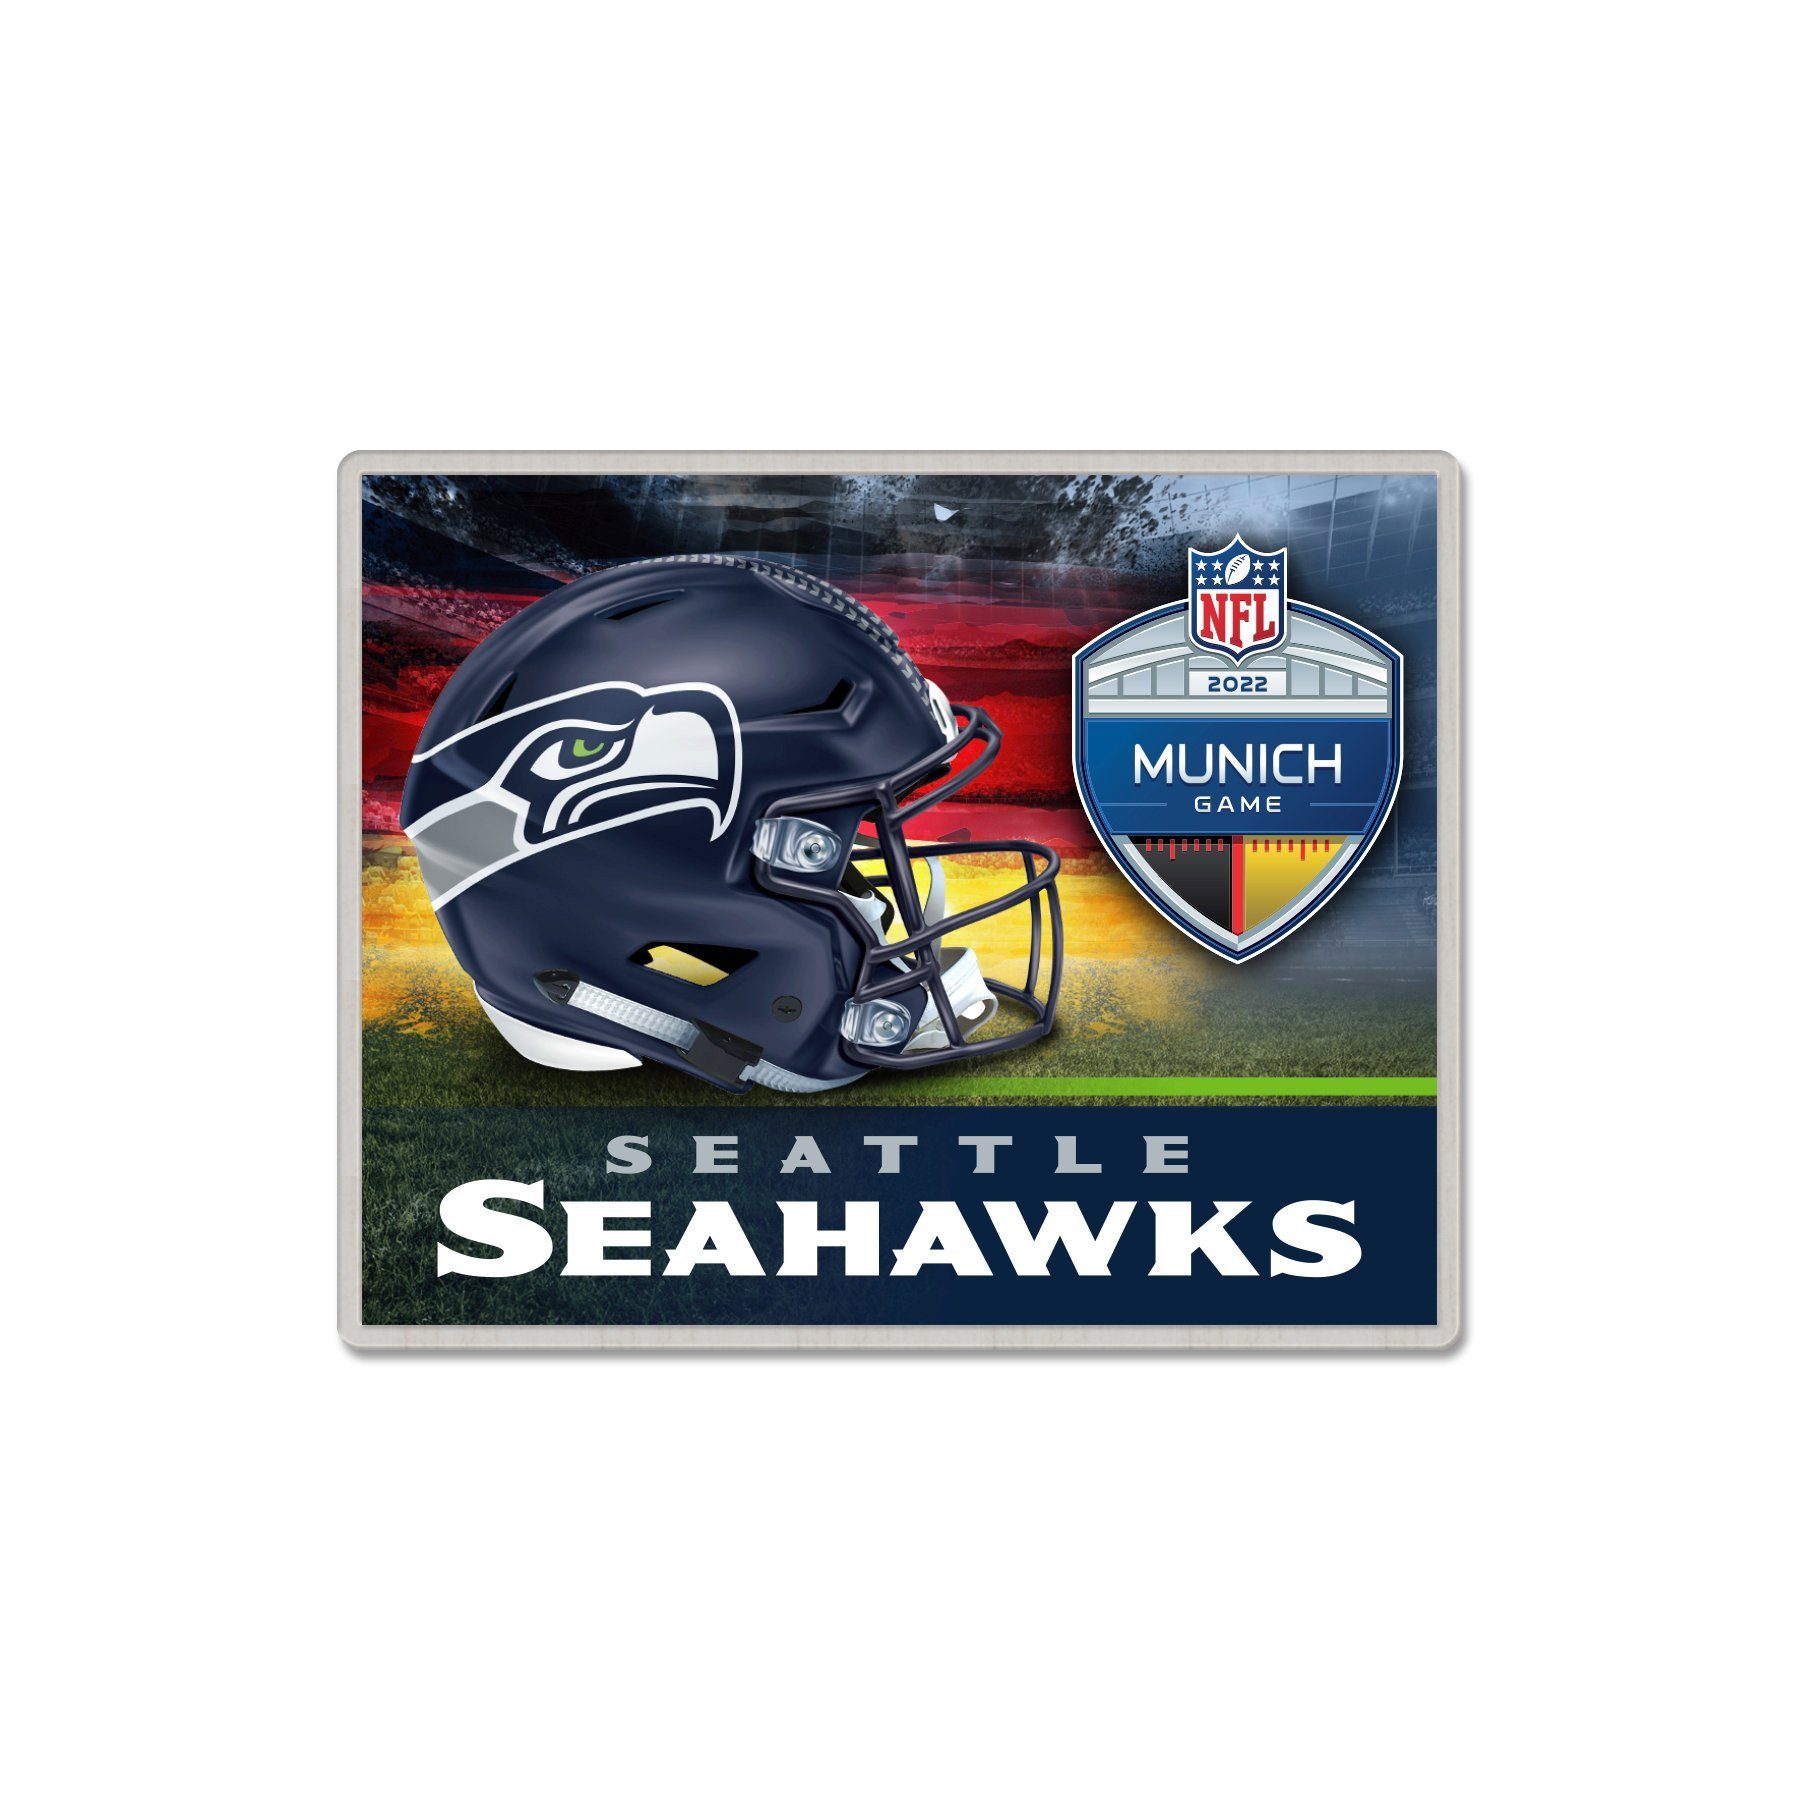 WinCraft Pins NFL Pin Badge NFL Seattle Seahawks